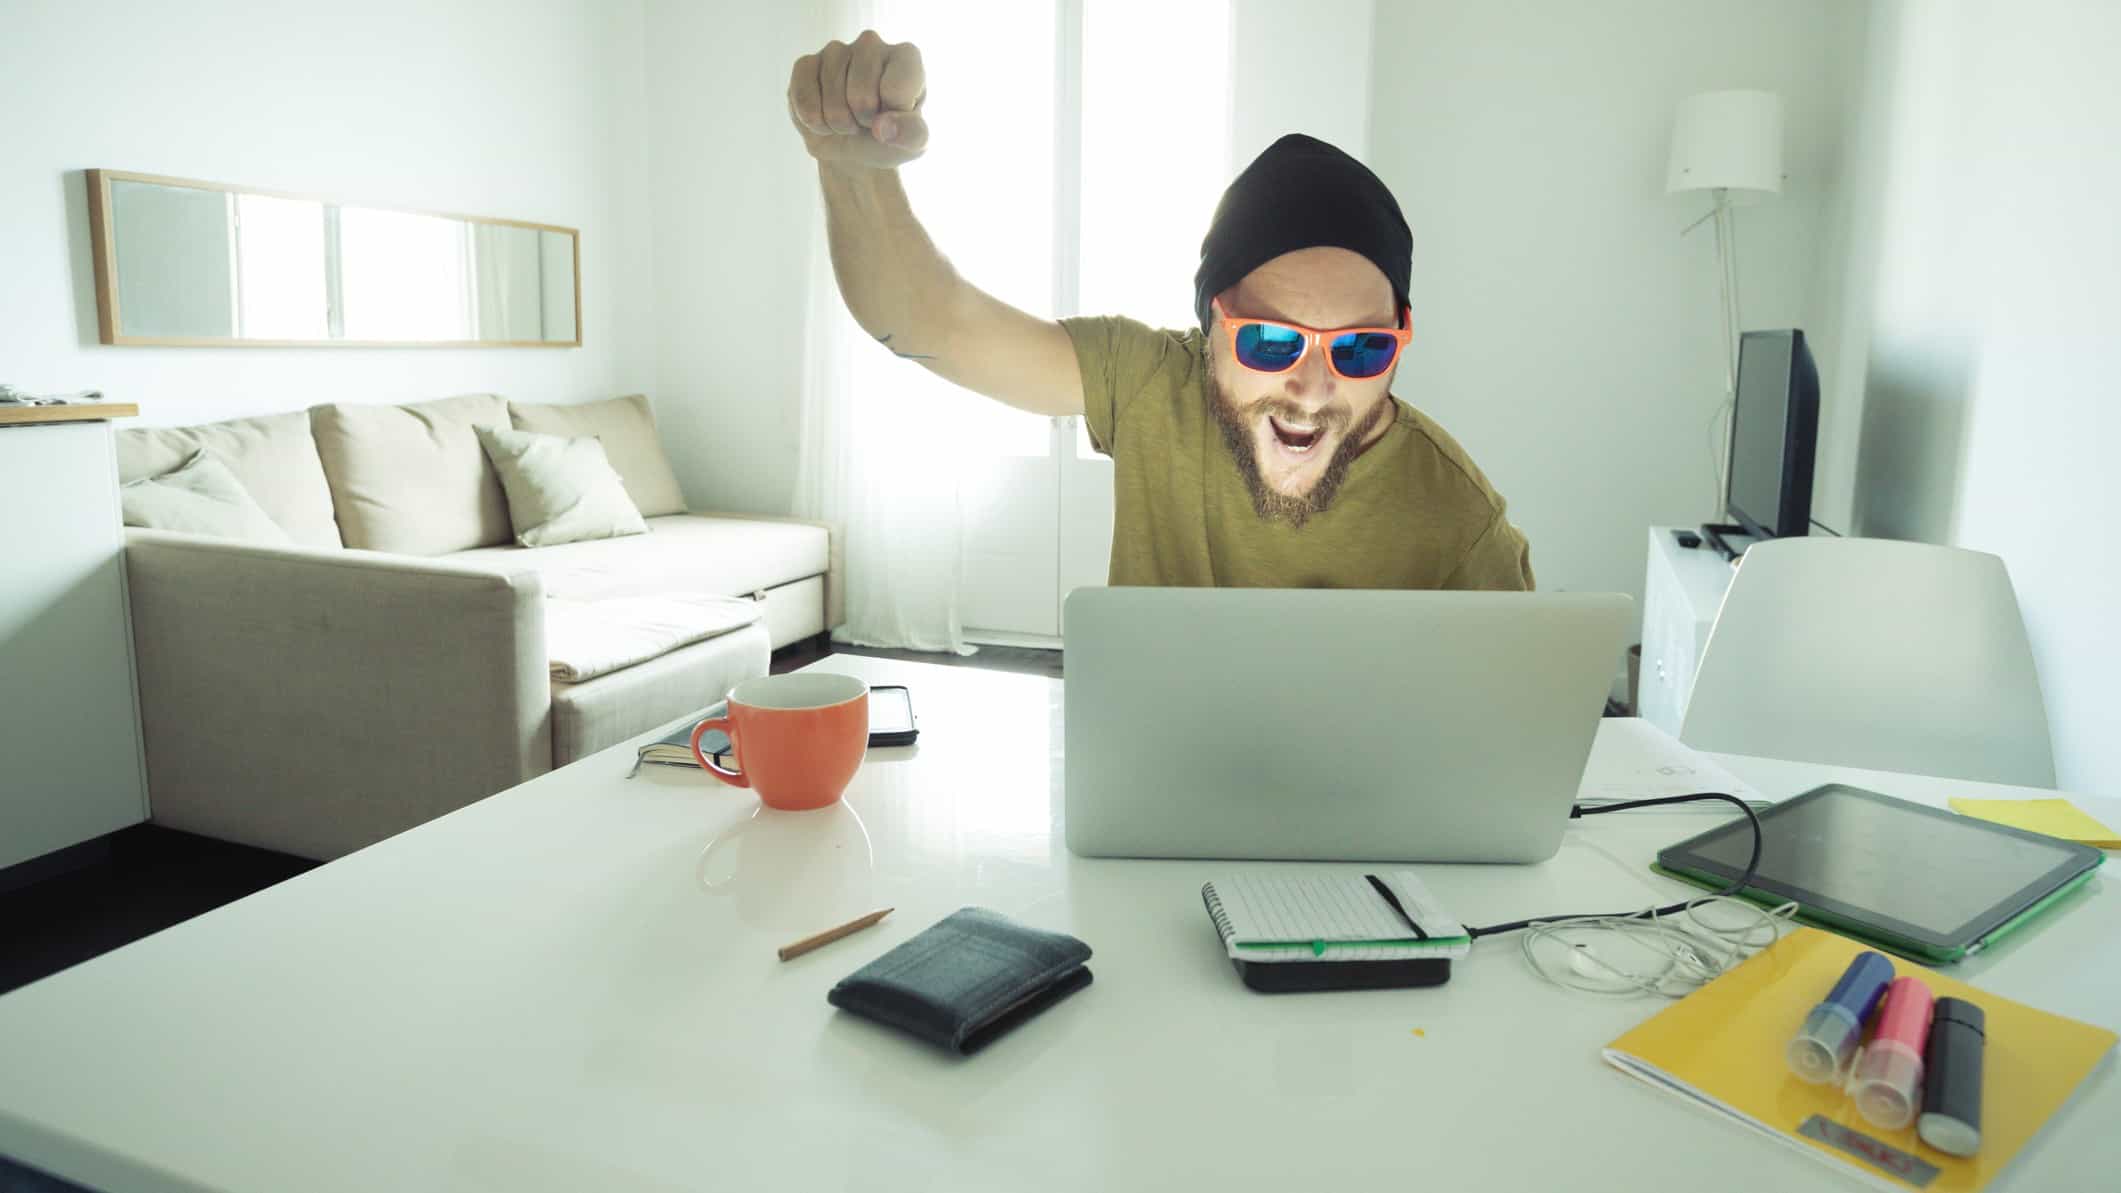 A man with a scrappy beard and wearing dark sunglasses and a beanie head covering raises a fist in happy celebration as he sits at is computer in a home environment.